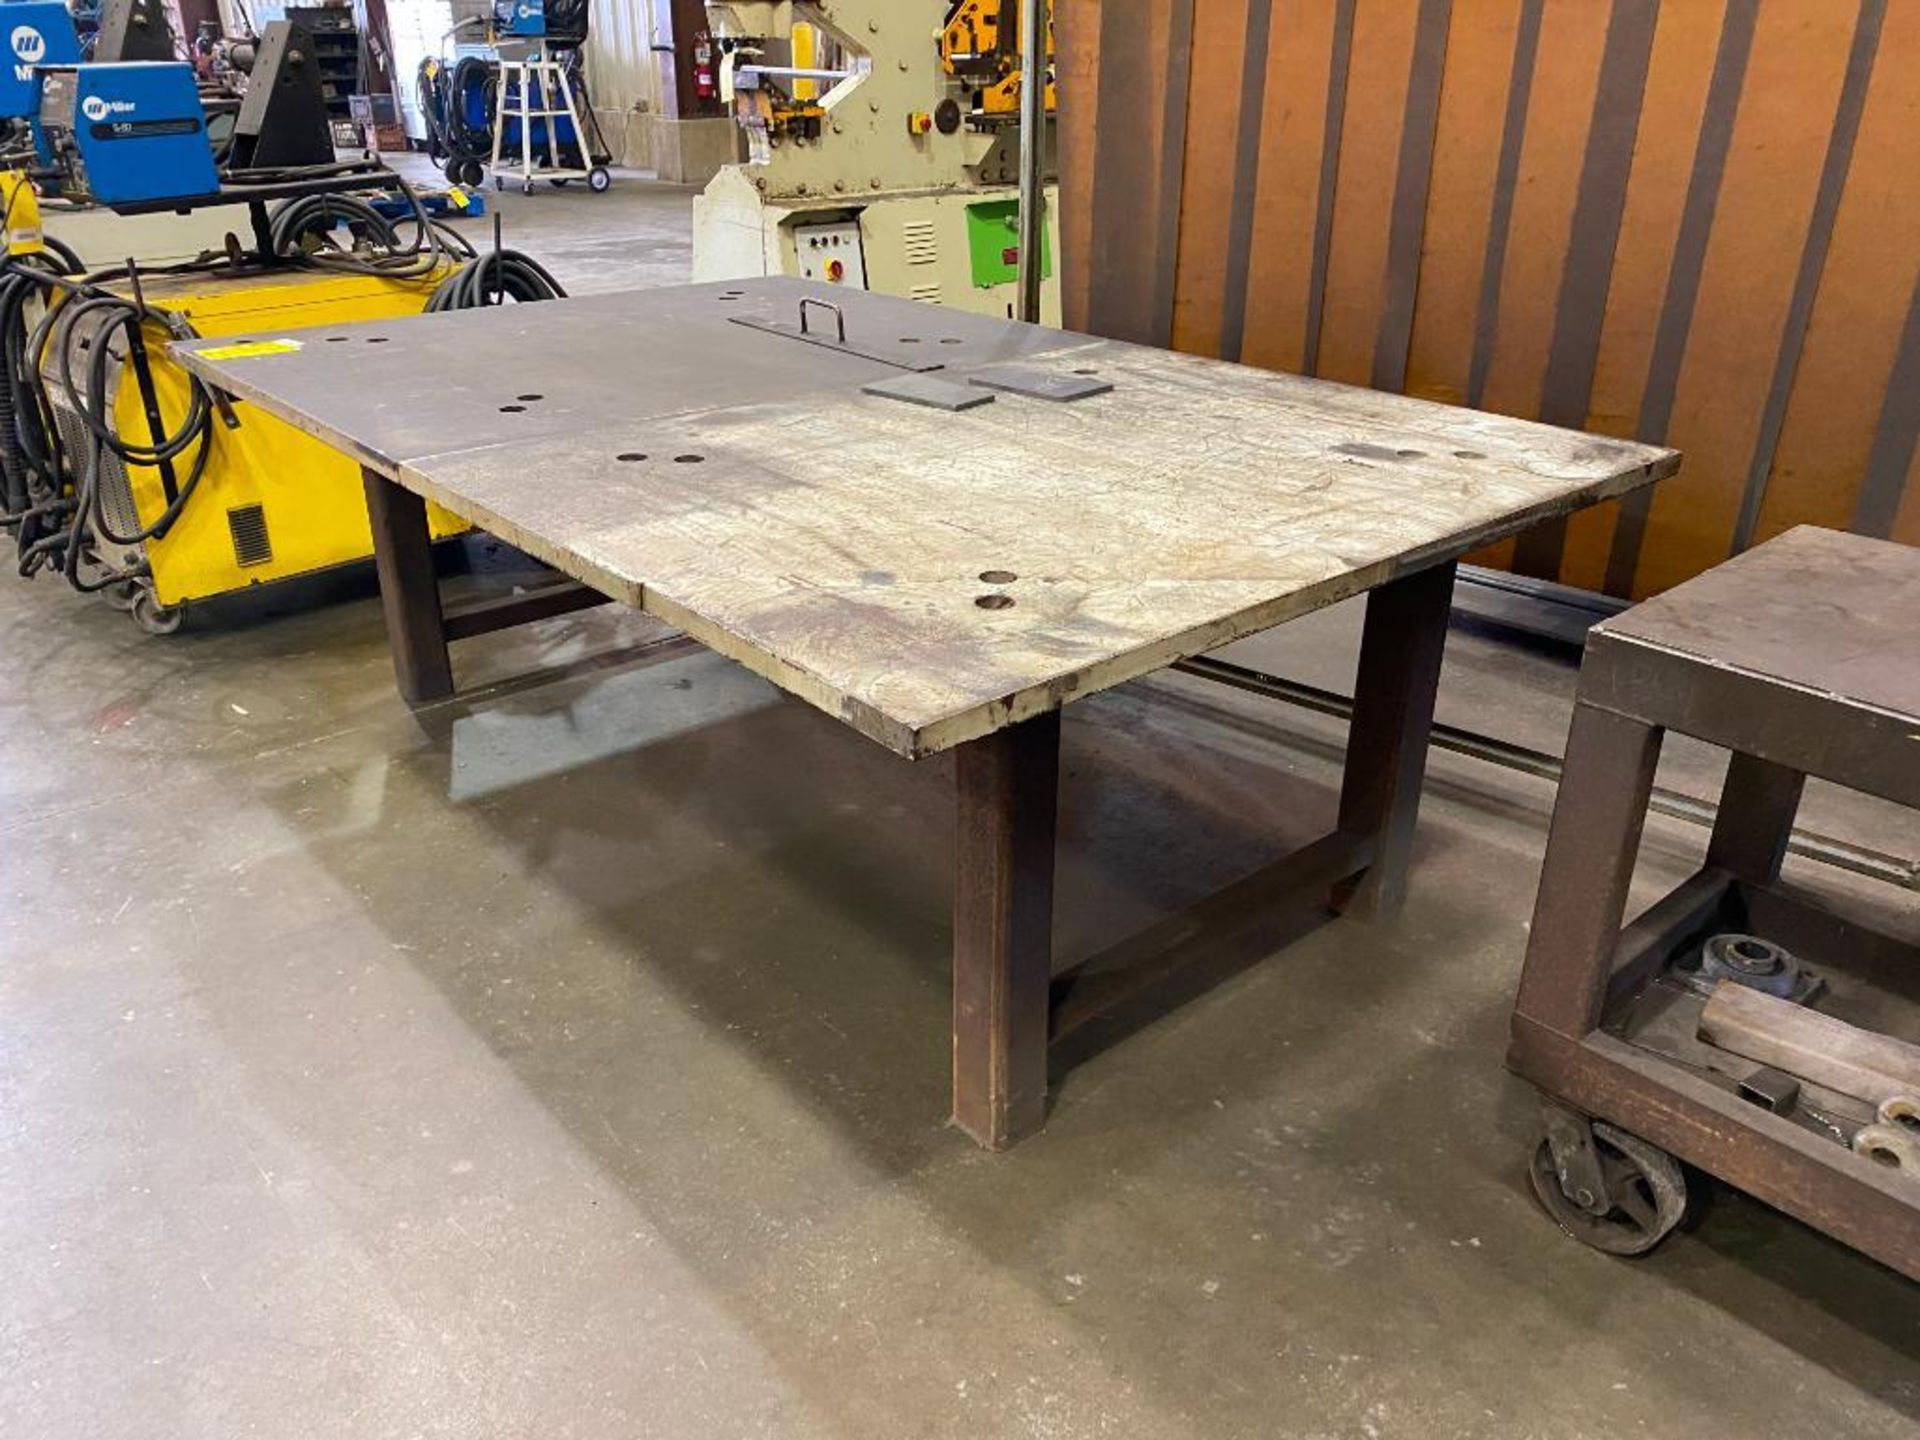 Welding Table, 84" x 54" x 28", 1-1/4" Thick Top - Image 2 of 3